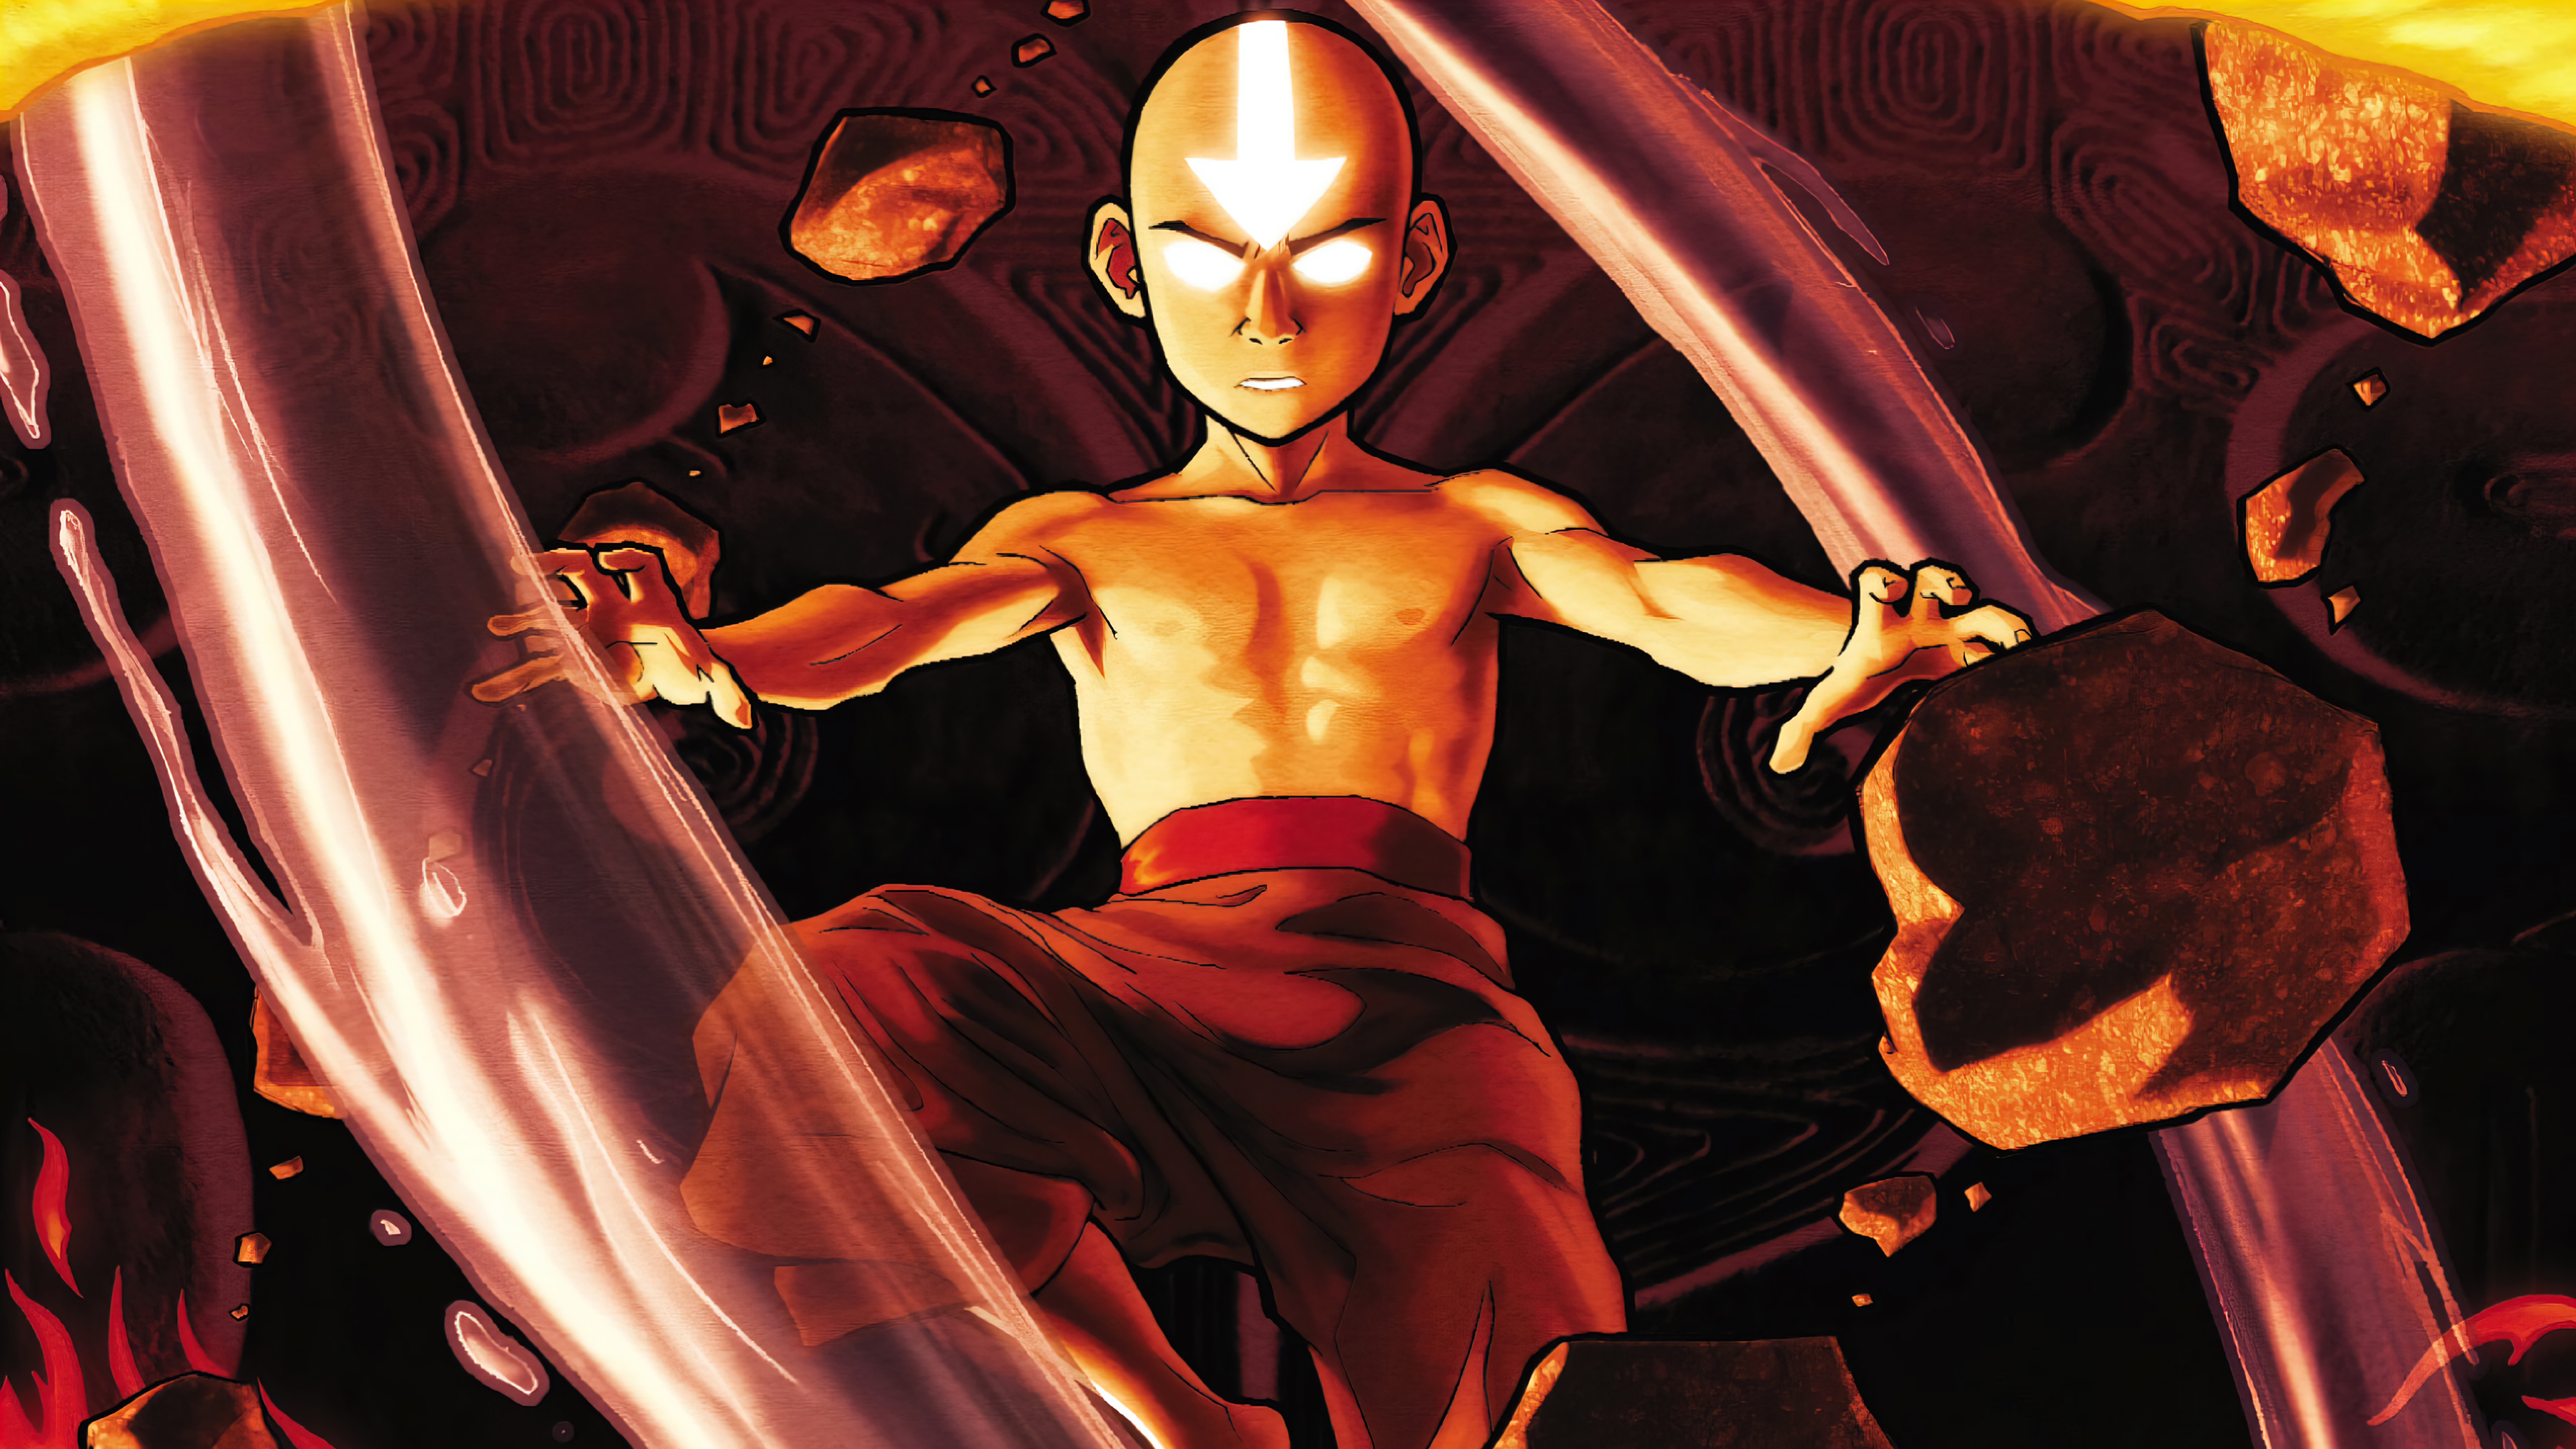 HD desktop wallpaper featuring Aang from Avatar: The Last Airbender in an elemental bending pose with a dynamic background.